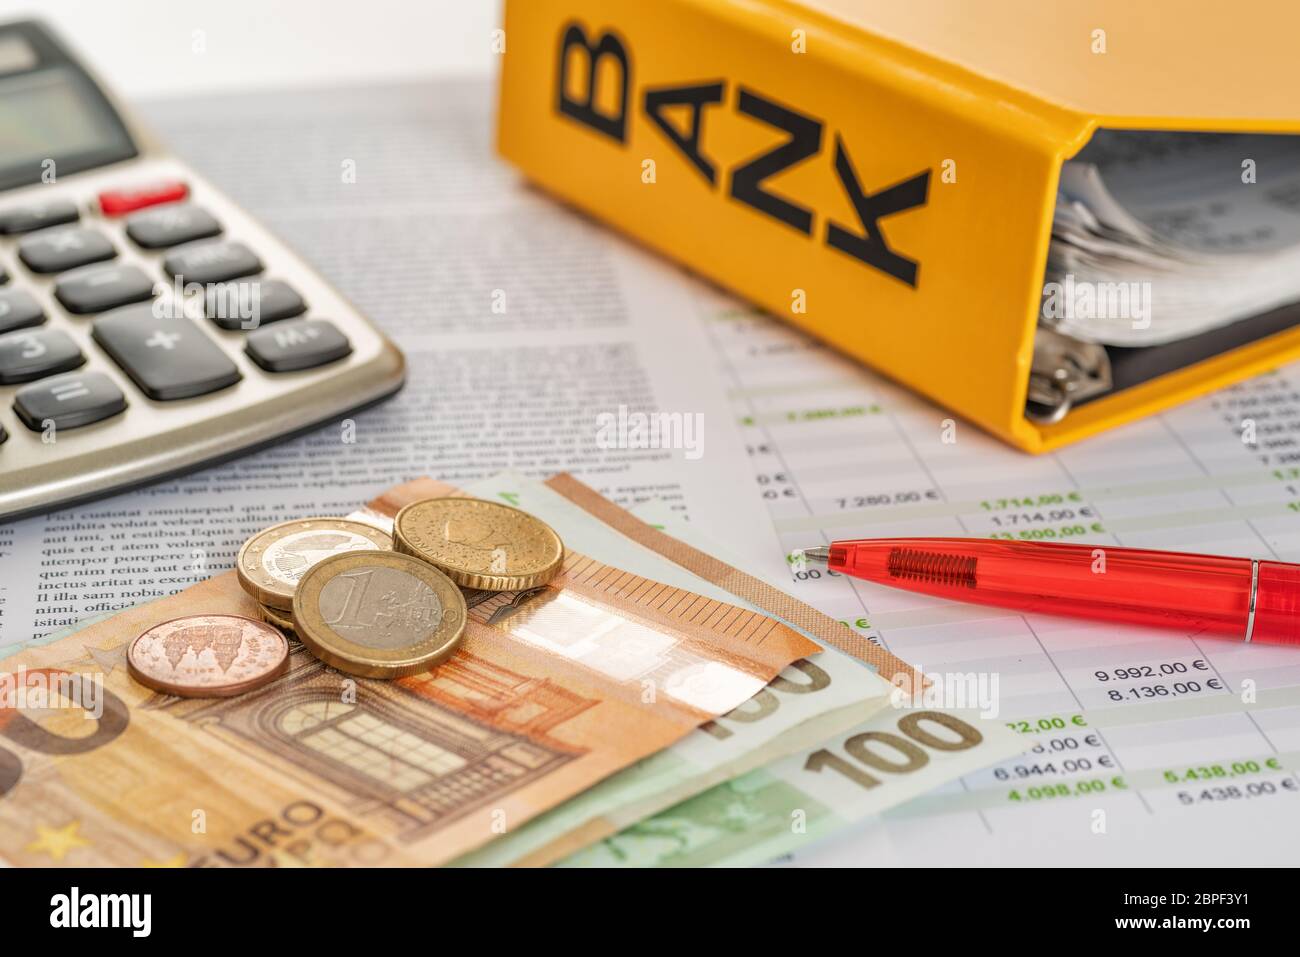 Euros with calculator and account statements Stock Photo